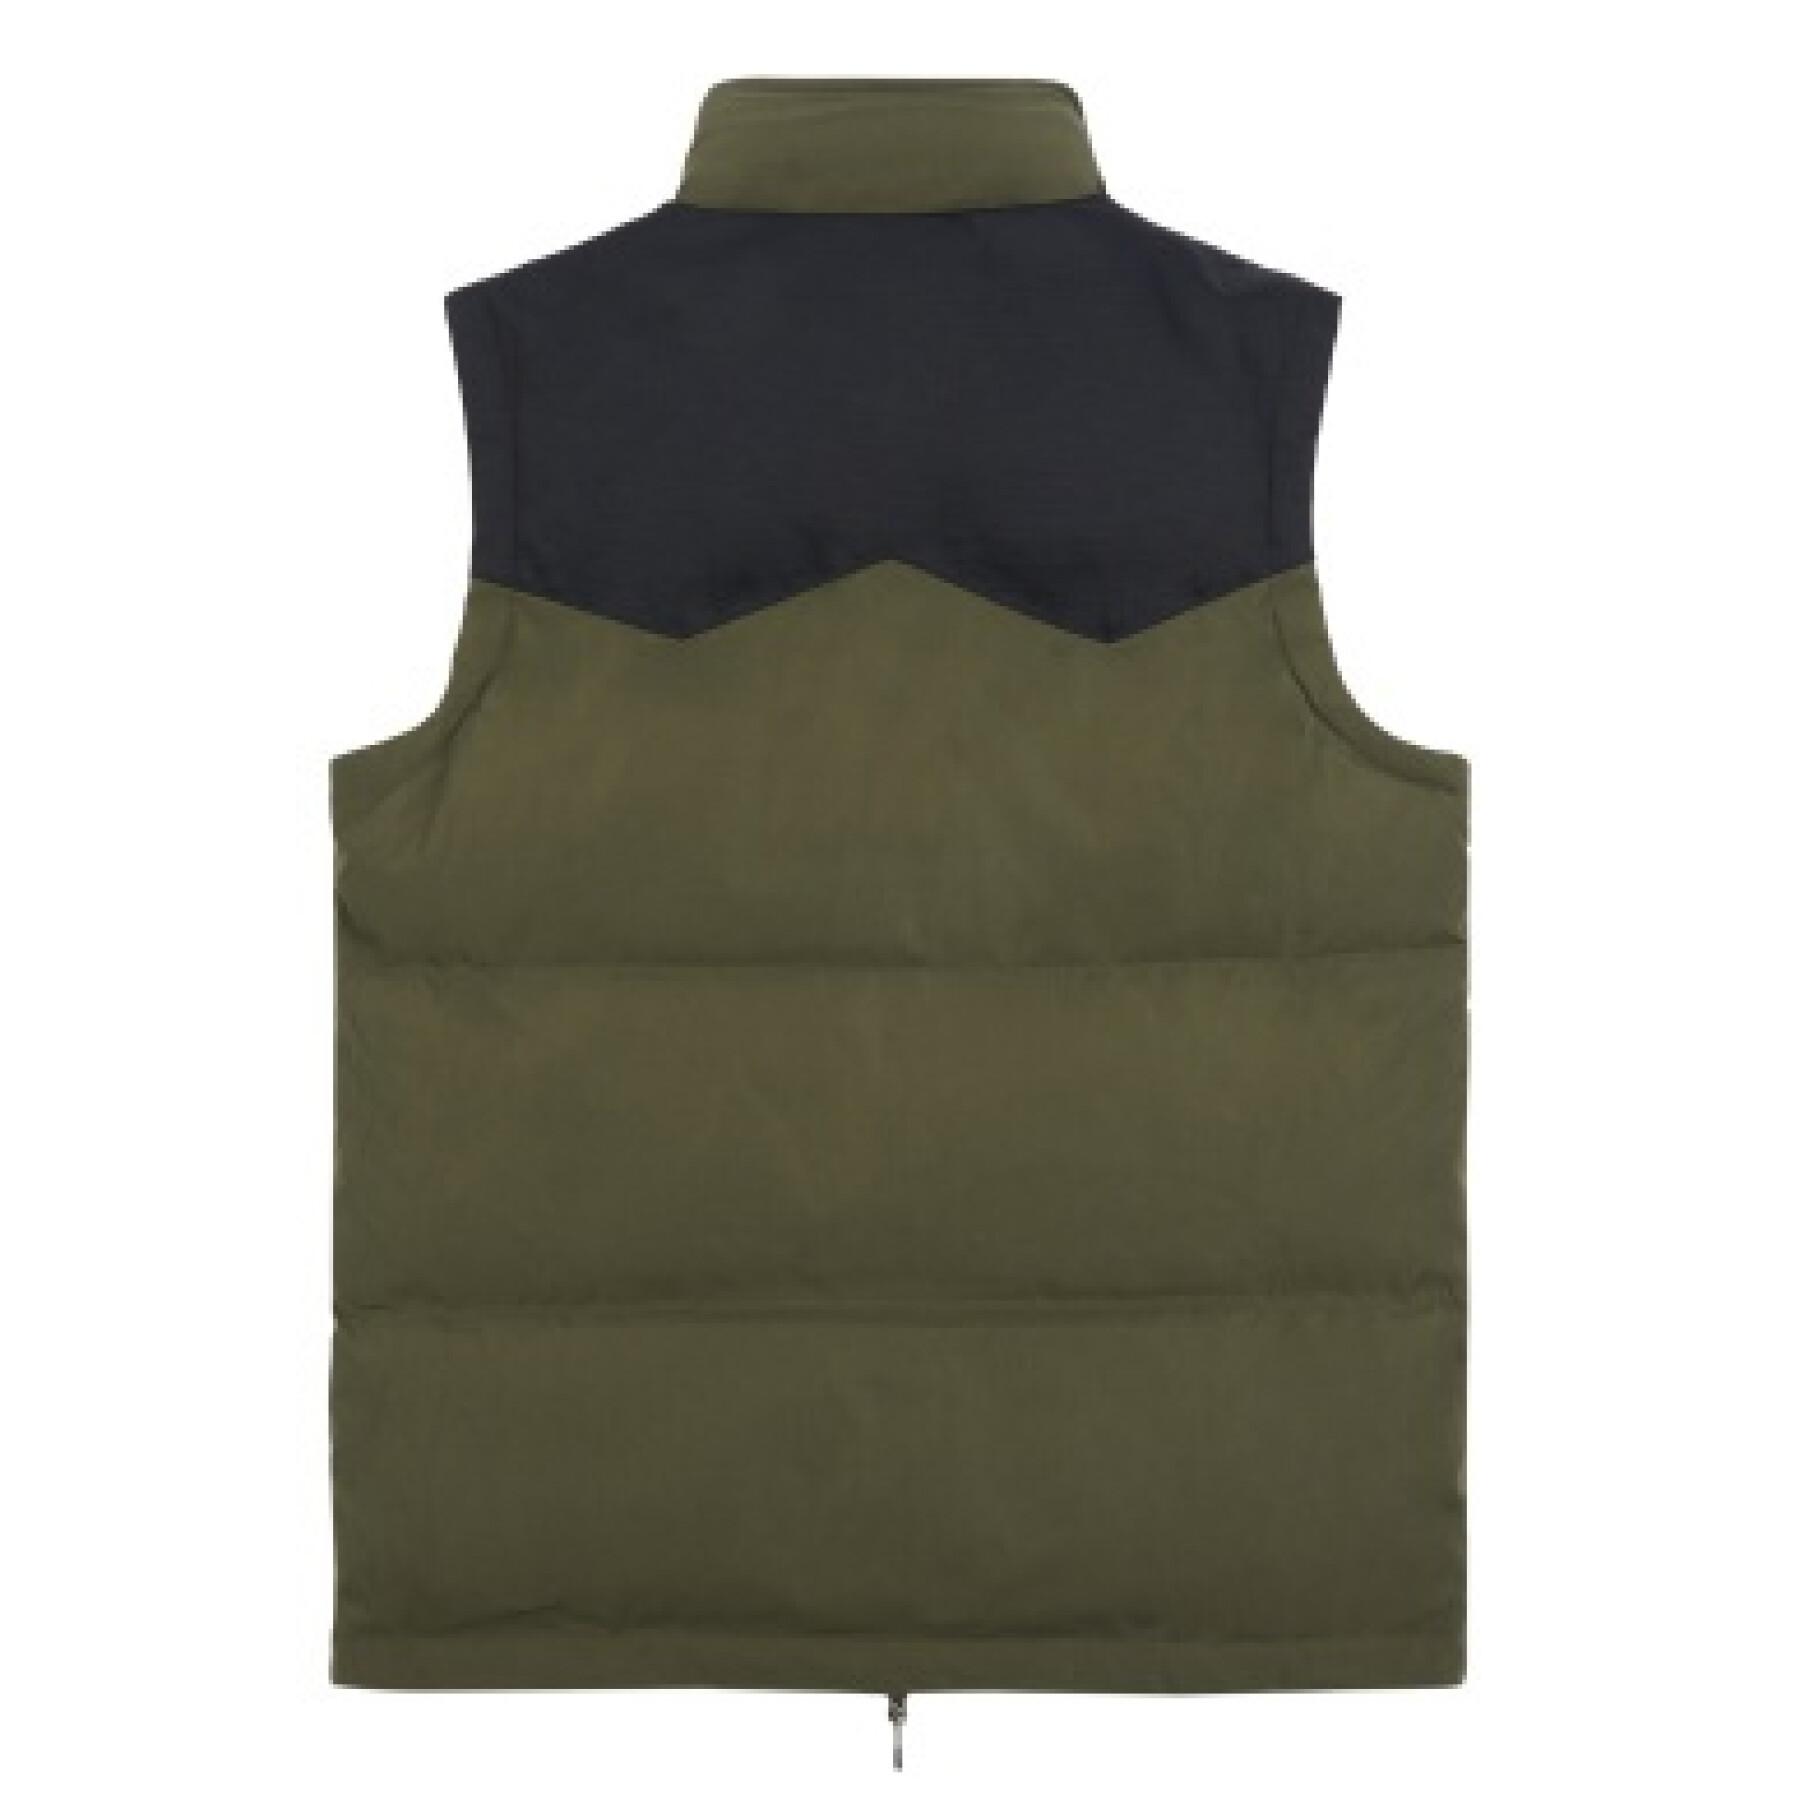 Quilted vest with funnel neck Penfield bear cut and sew